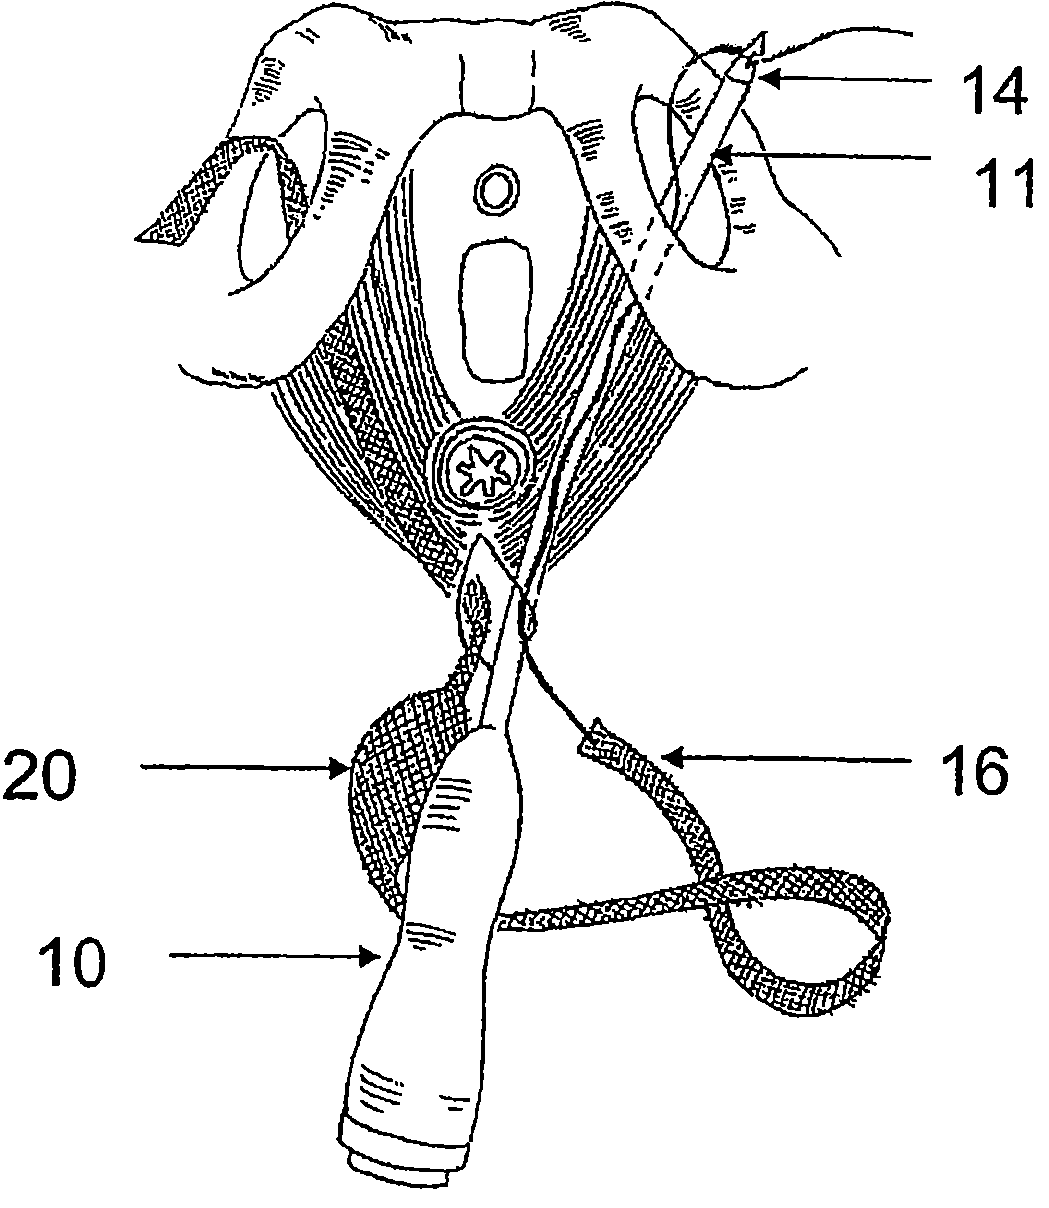 System and method for treatment of anal incontinence and pelvic organ prolapse